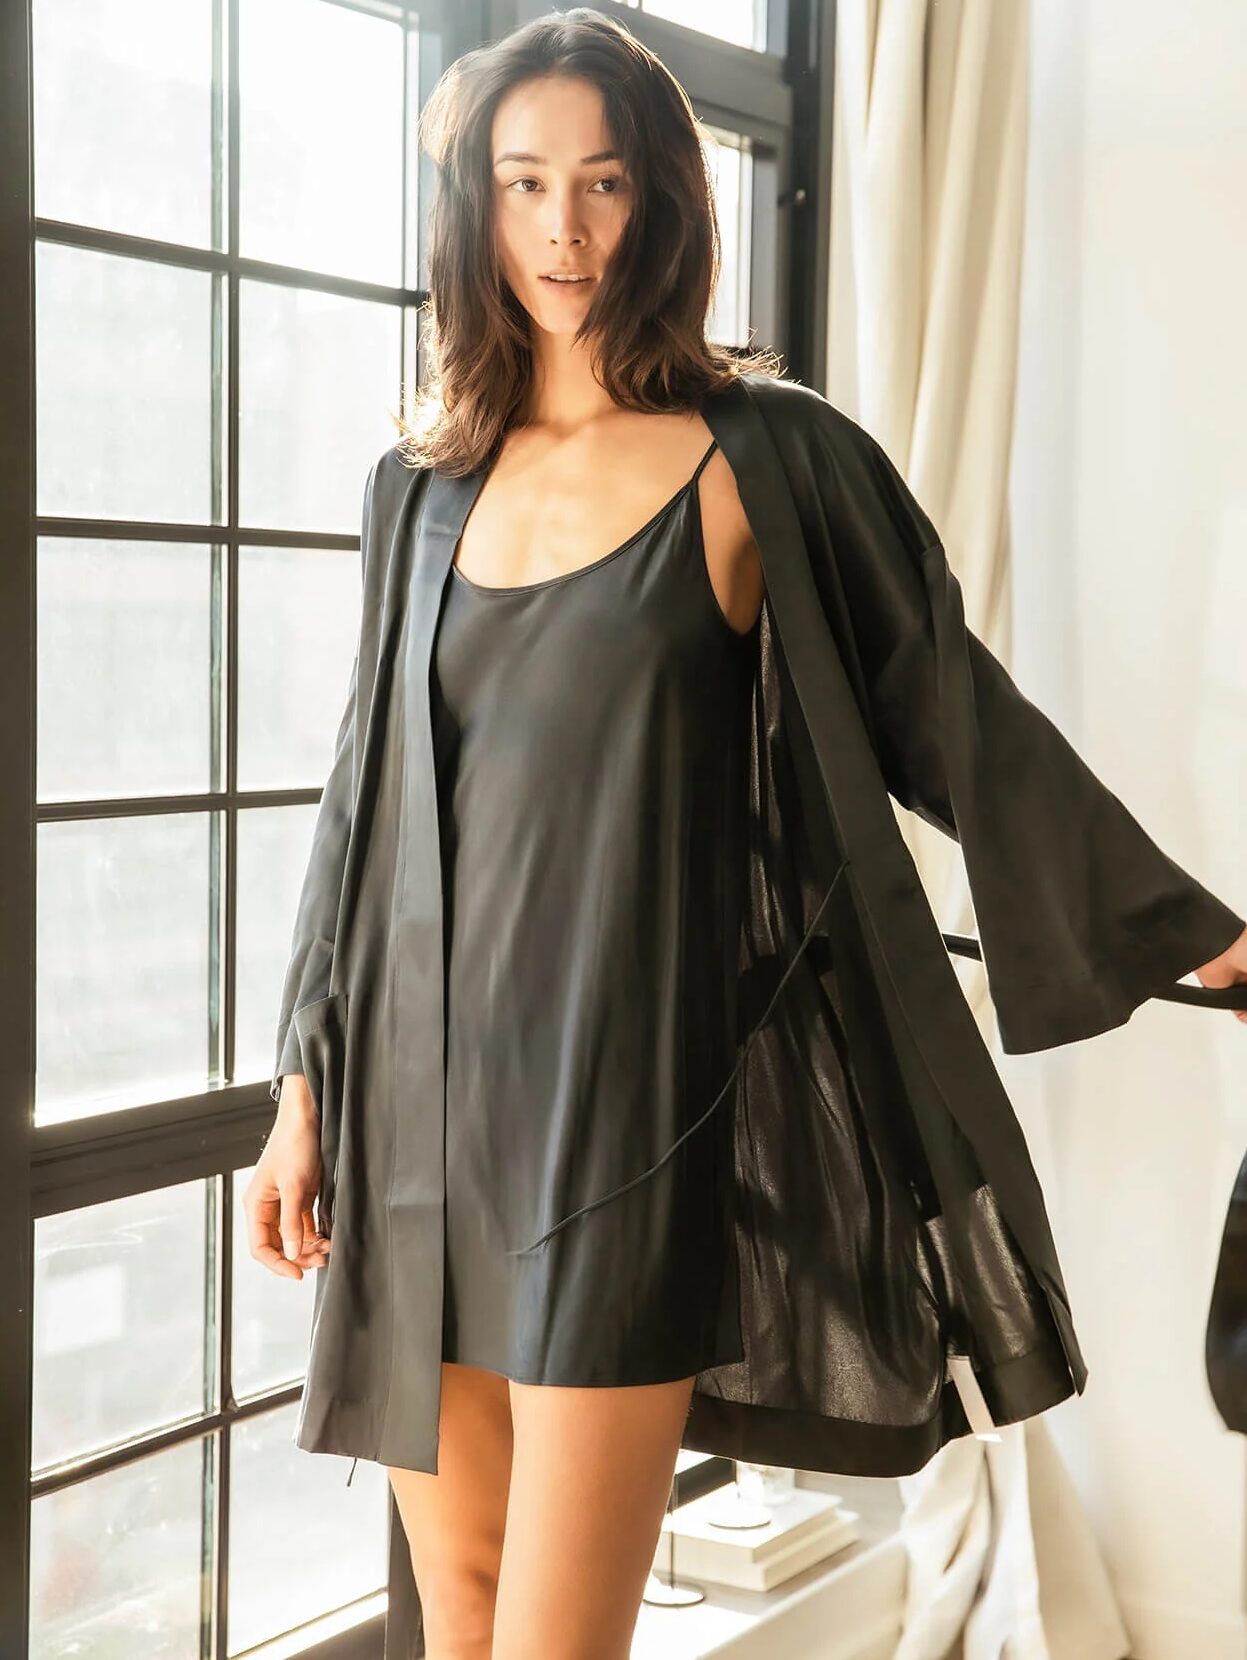 A model in a black silk robe and matching nightgown stands in front of a window and looks at the camera